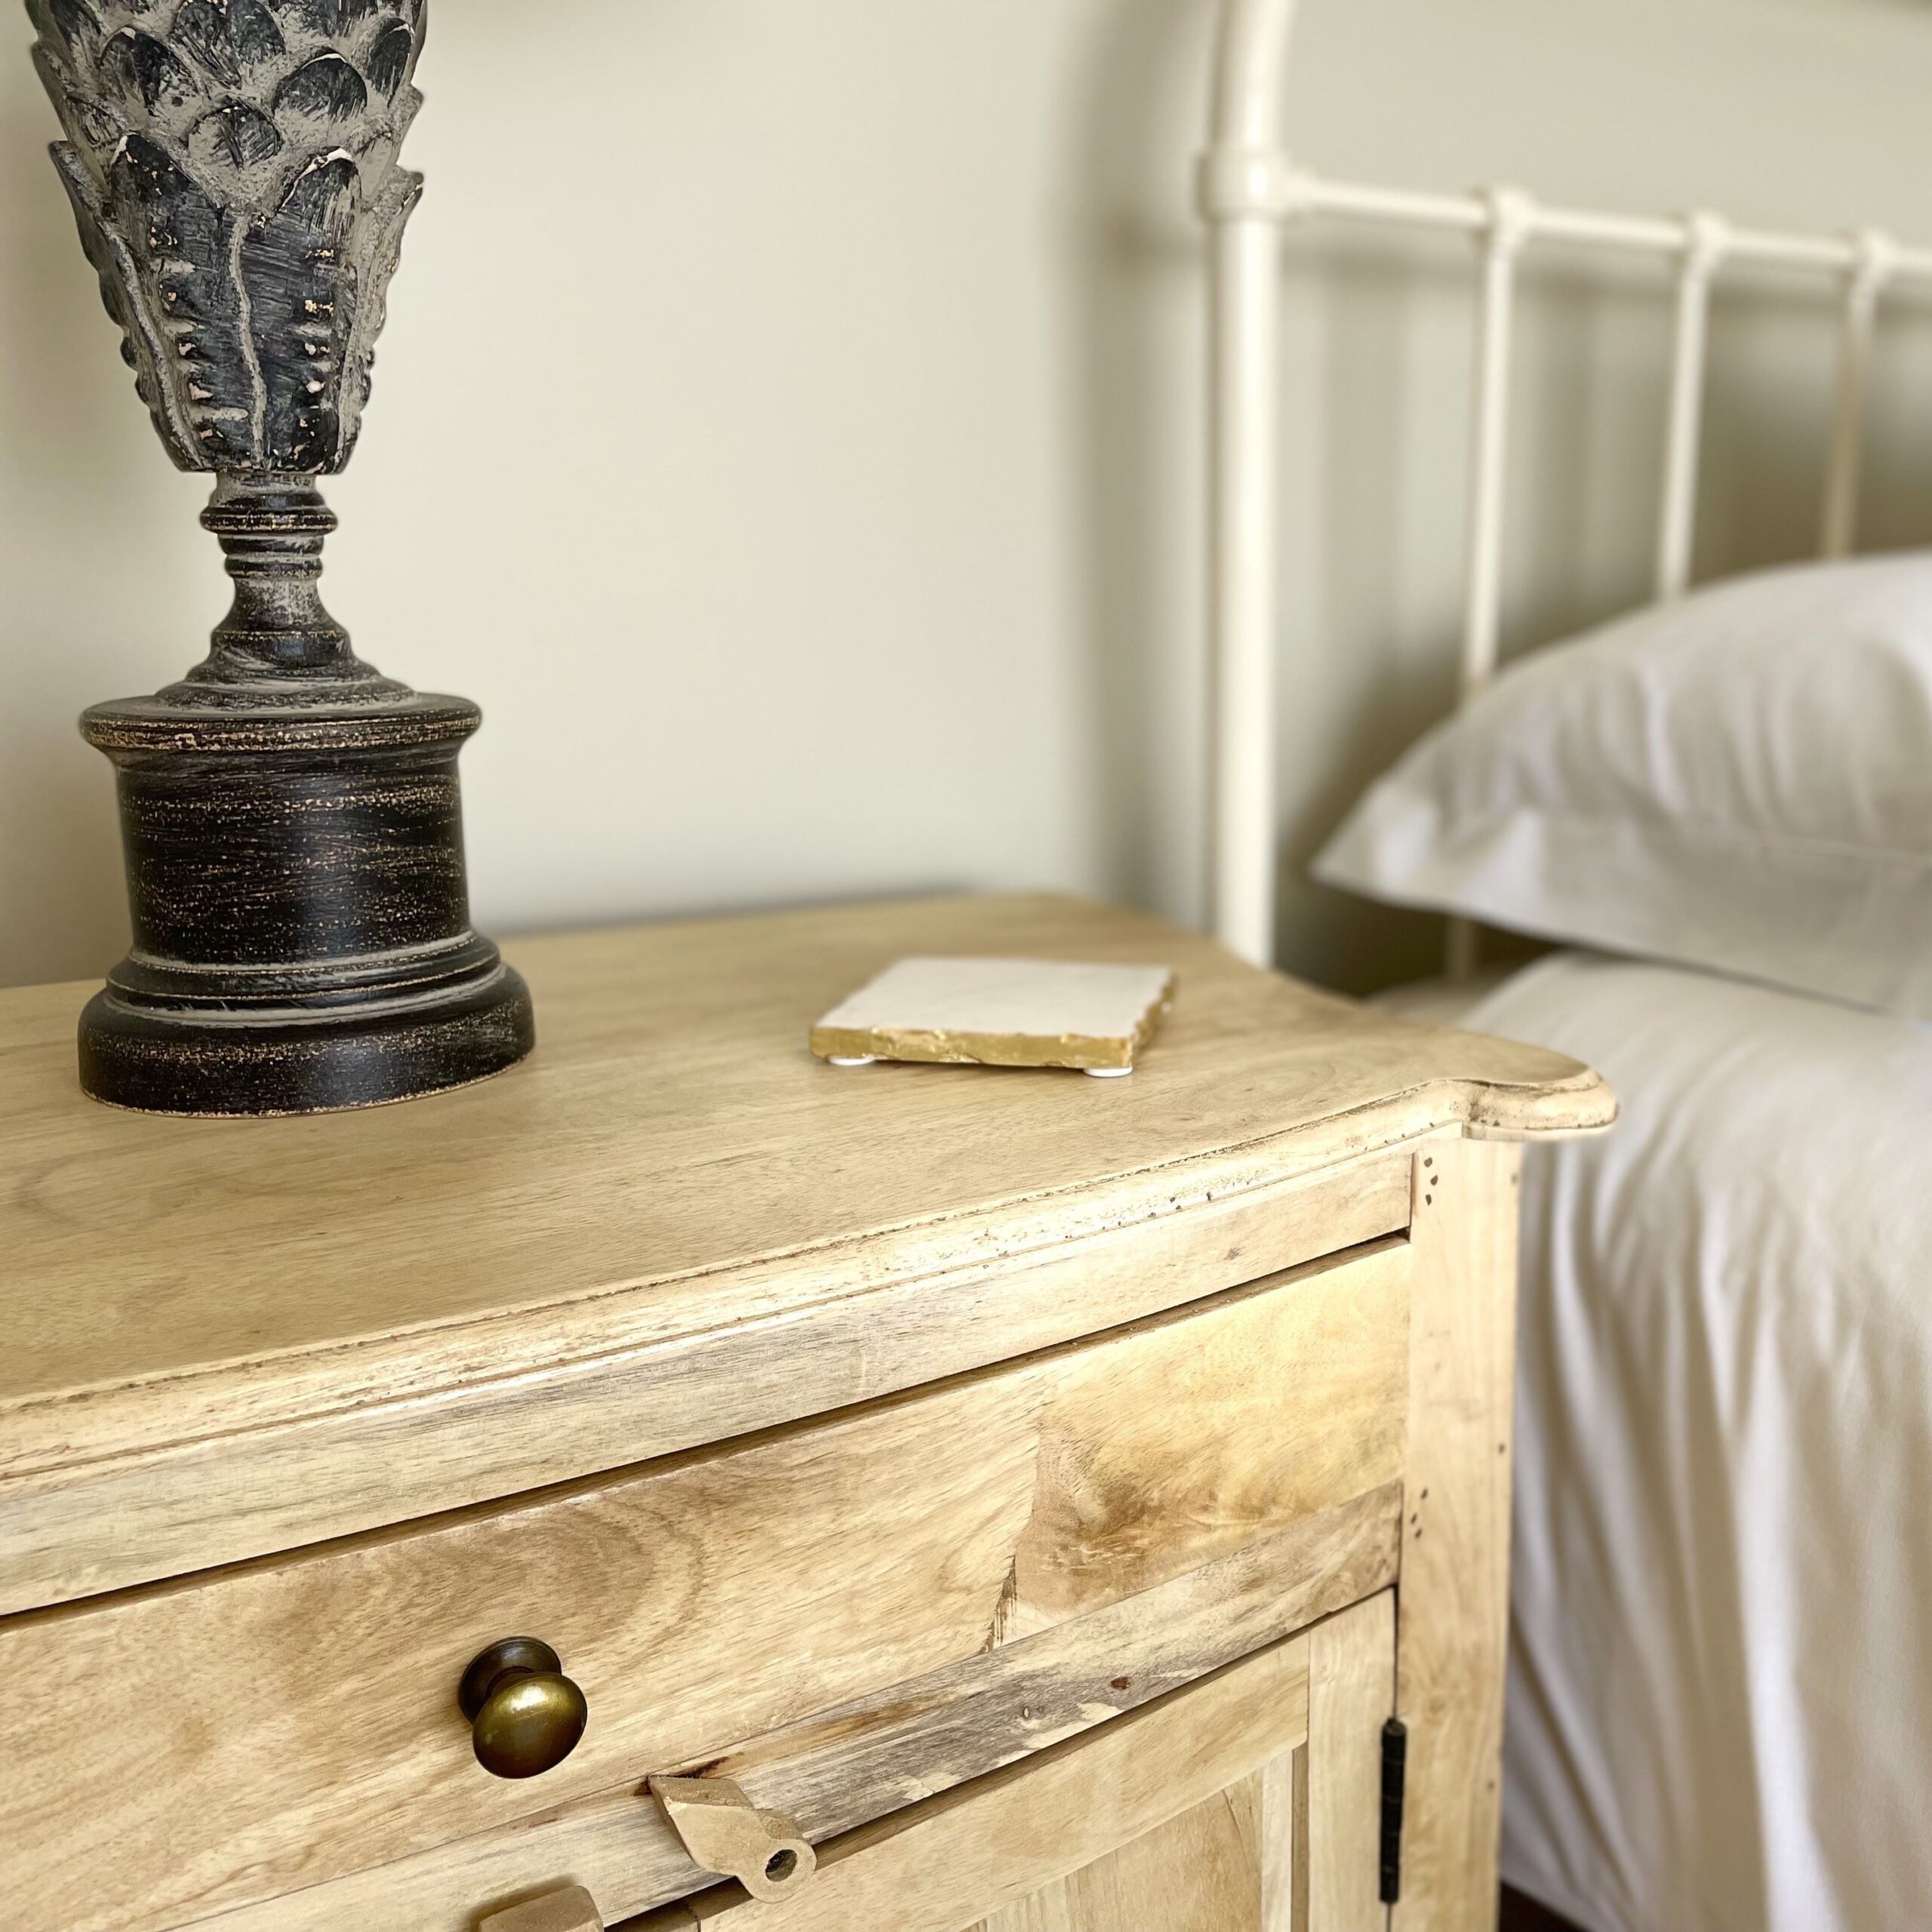 Eden bedside table next to bed with lamp and coaster